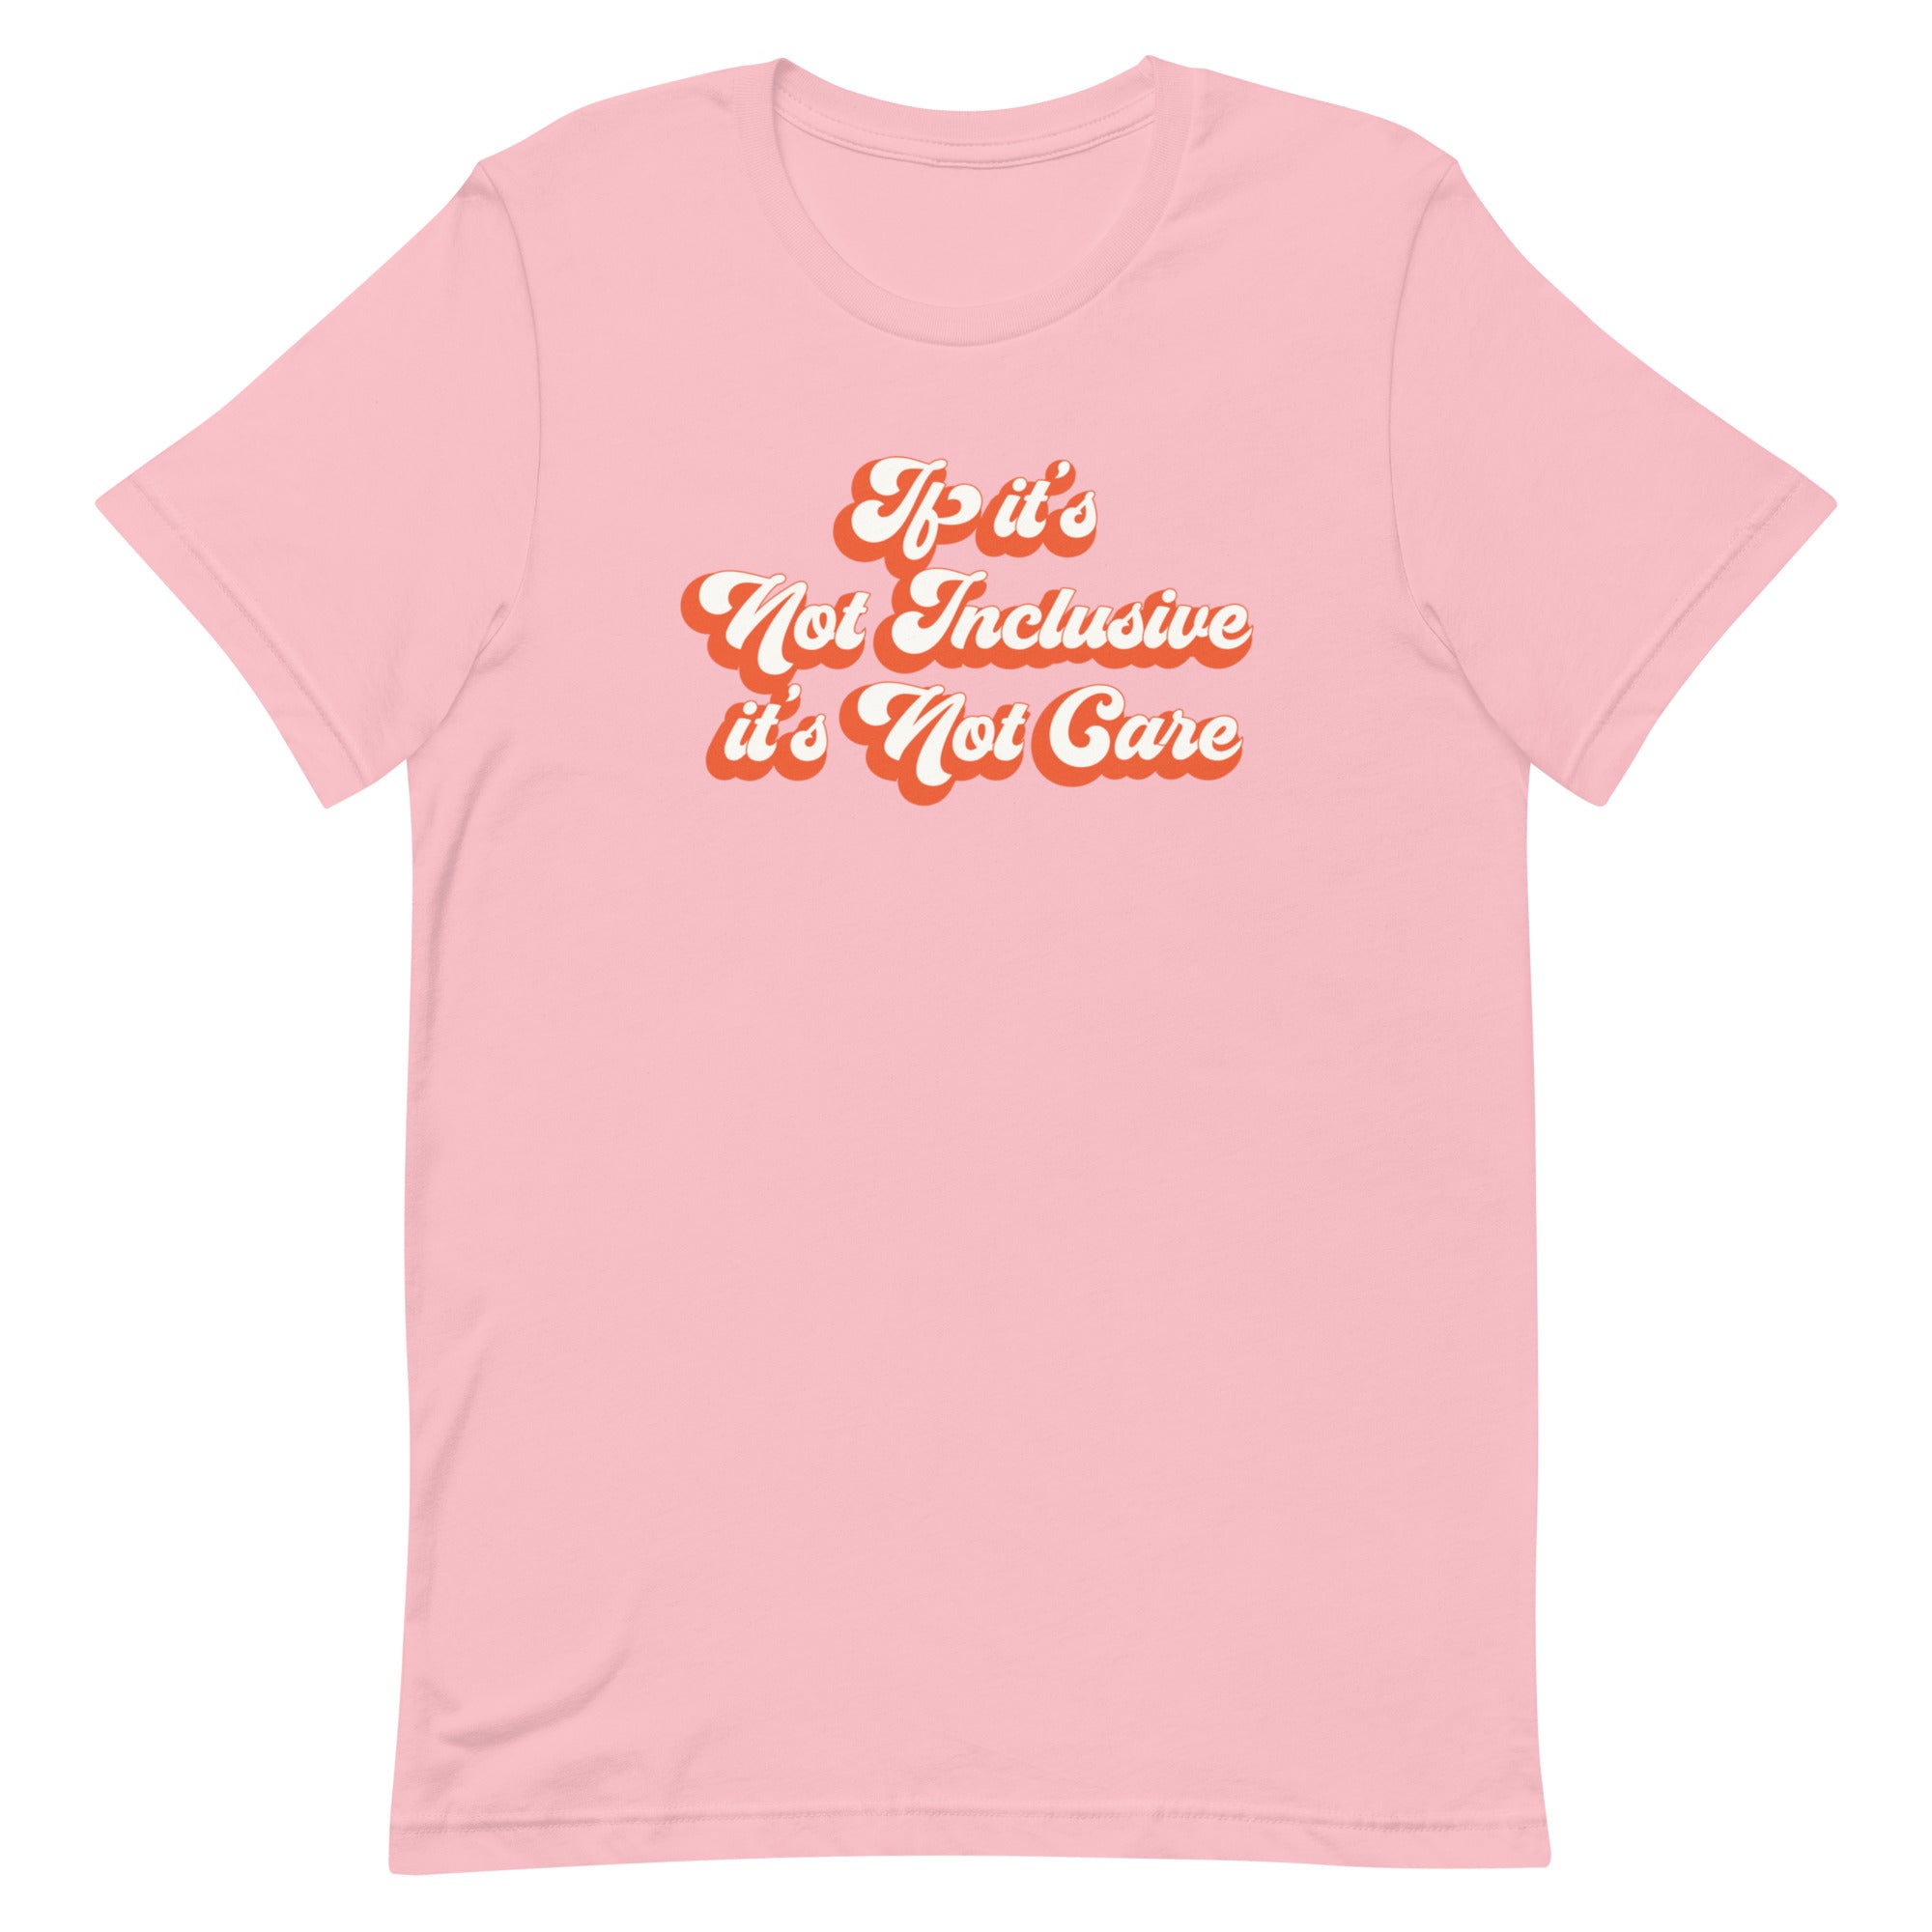 If It's Not Inclusive, It's Not Care Tee